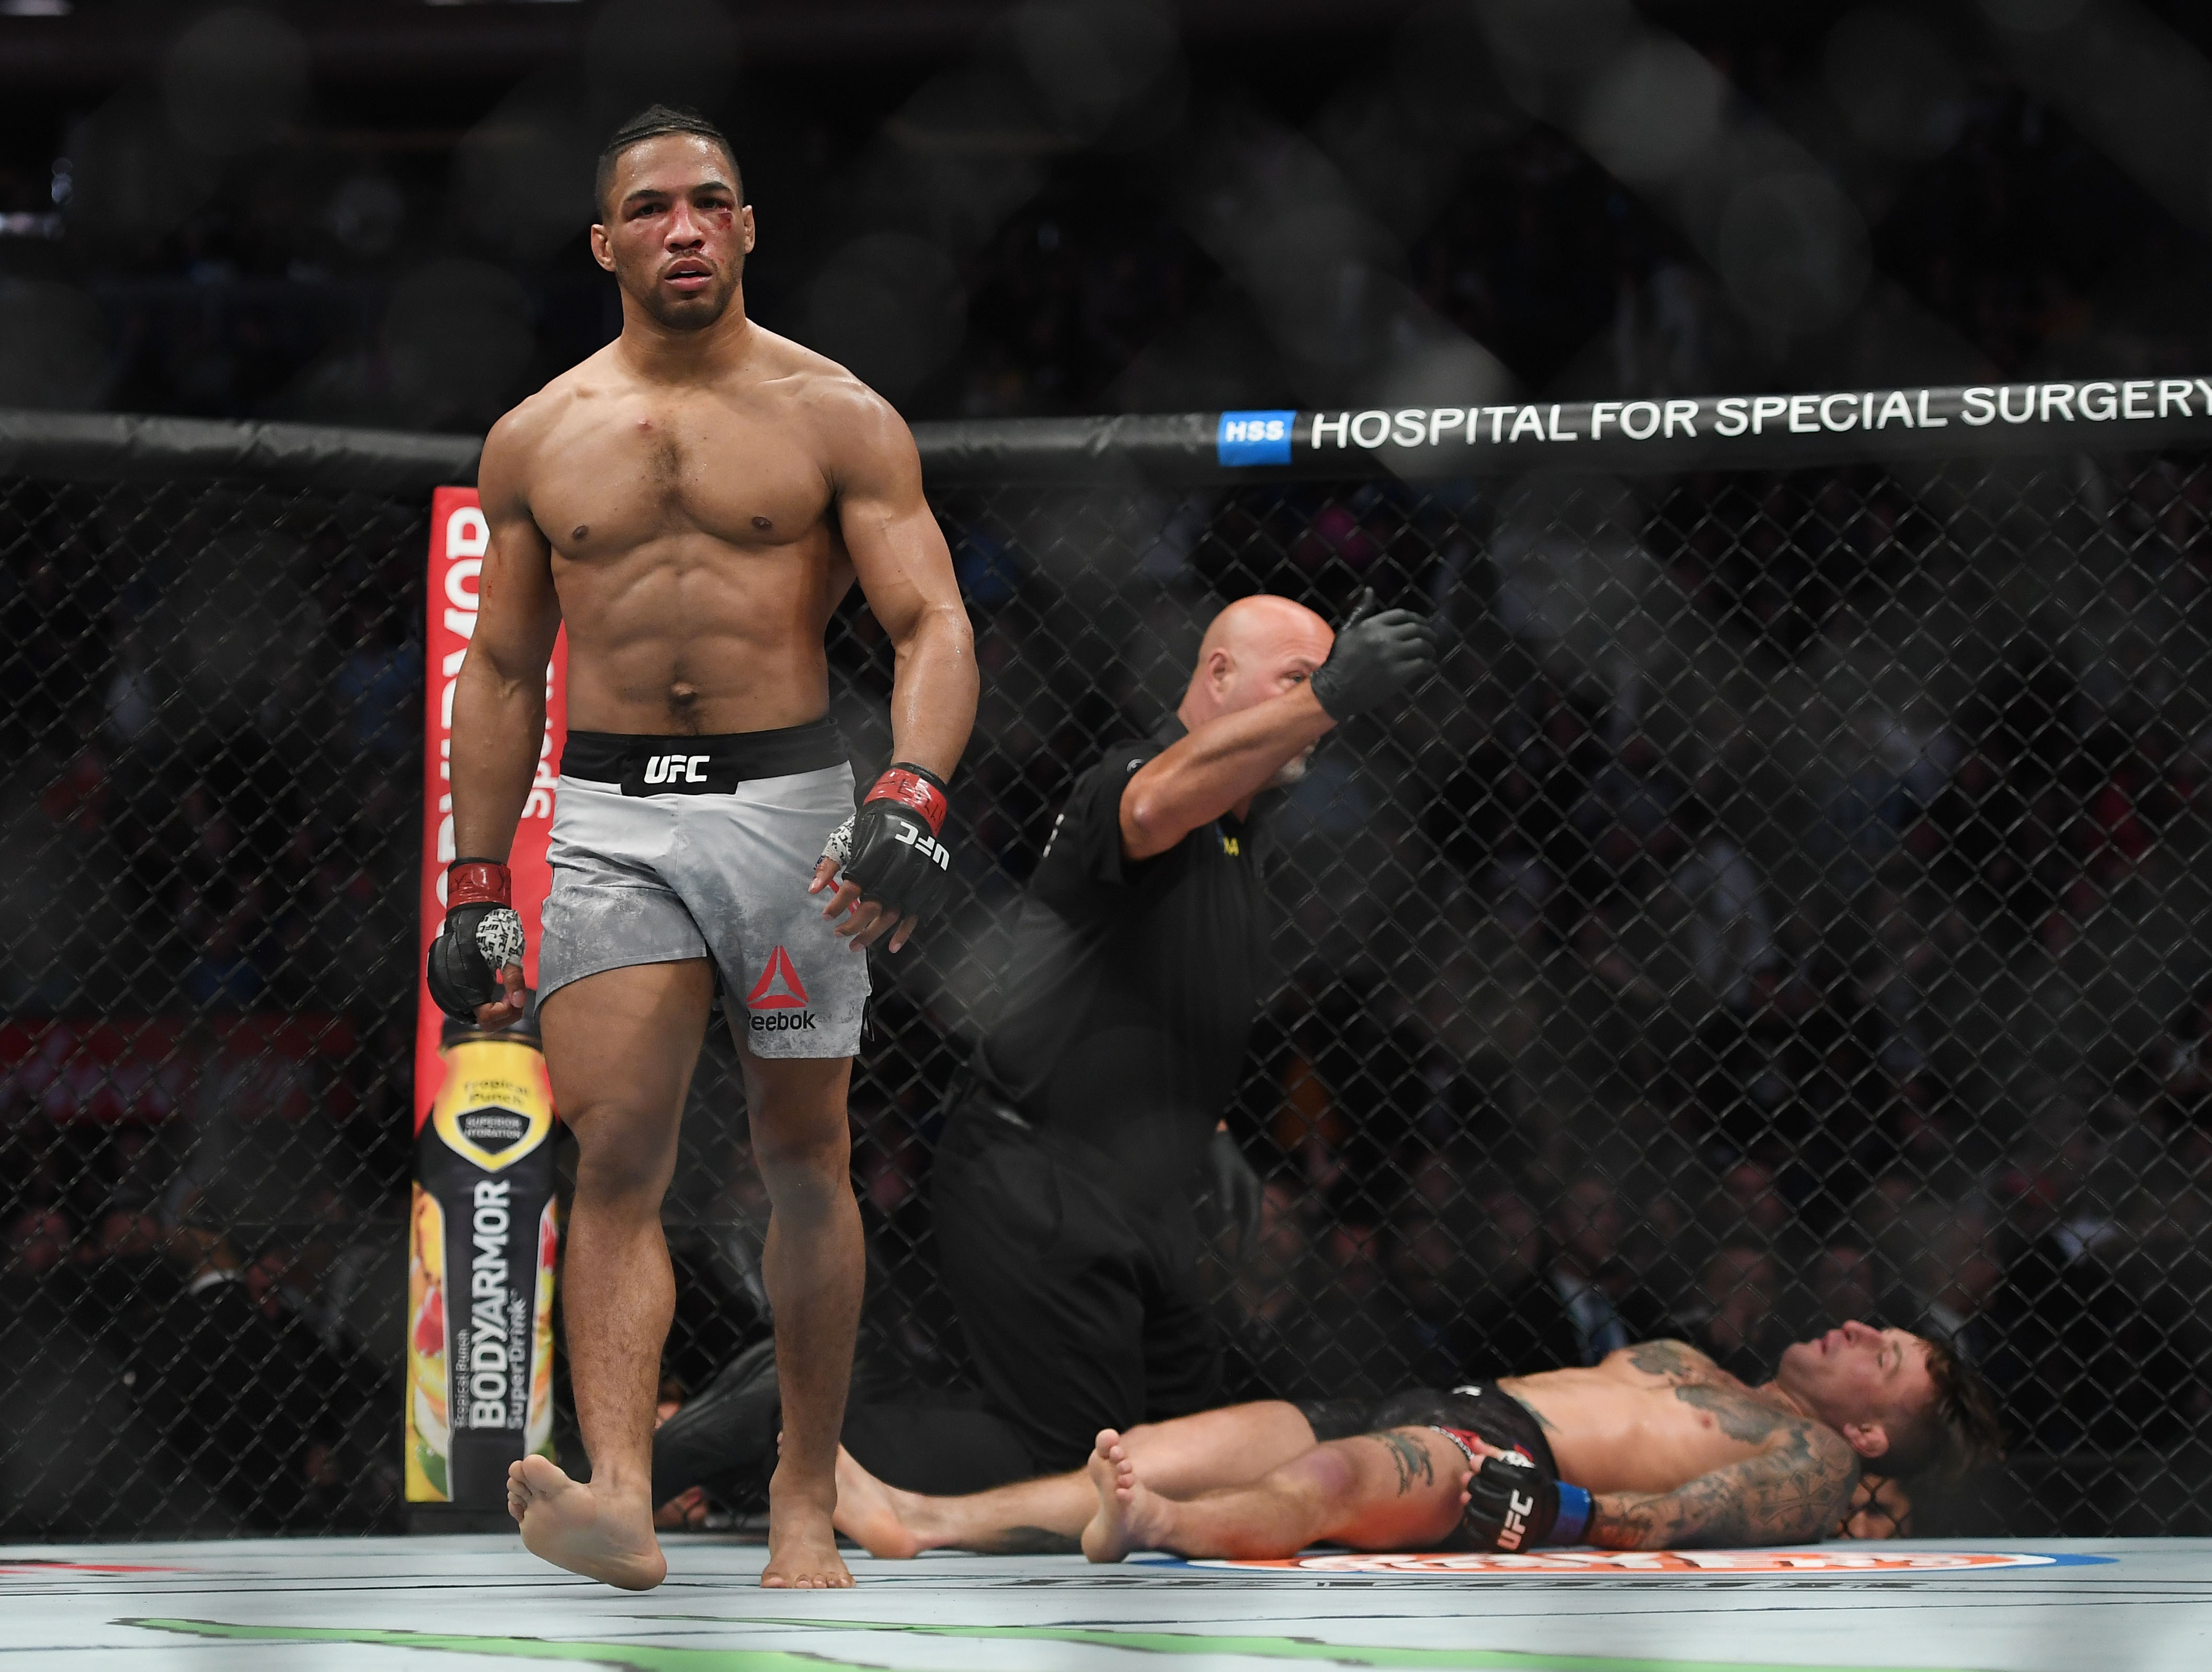 Kevin Lee walks off after knocking Gregor Gillespie out with a head kick. Photo: USA TODAY Sports